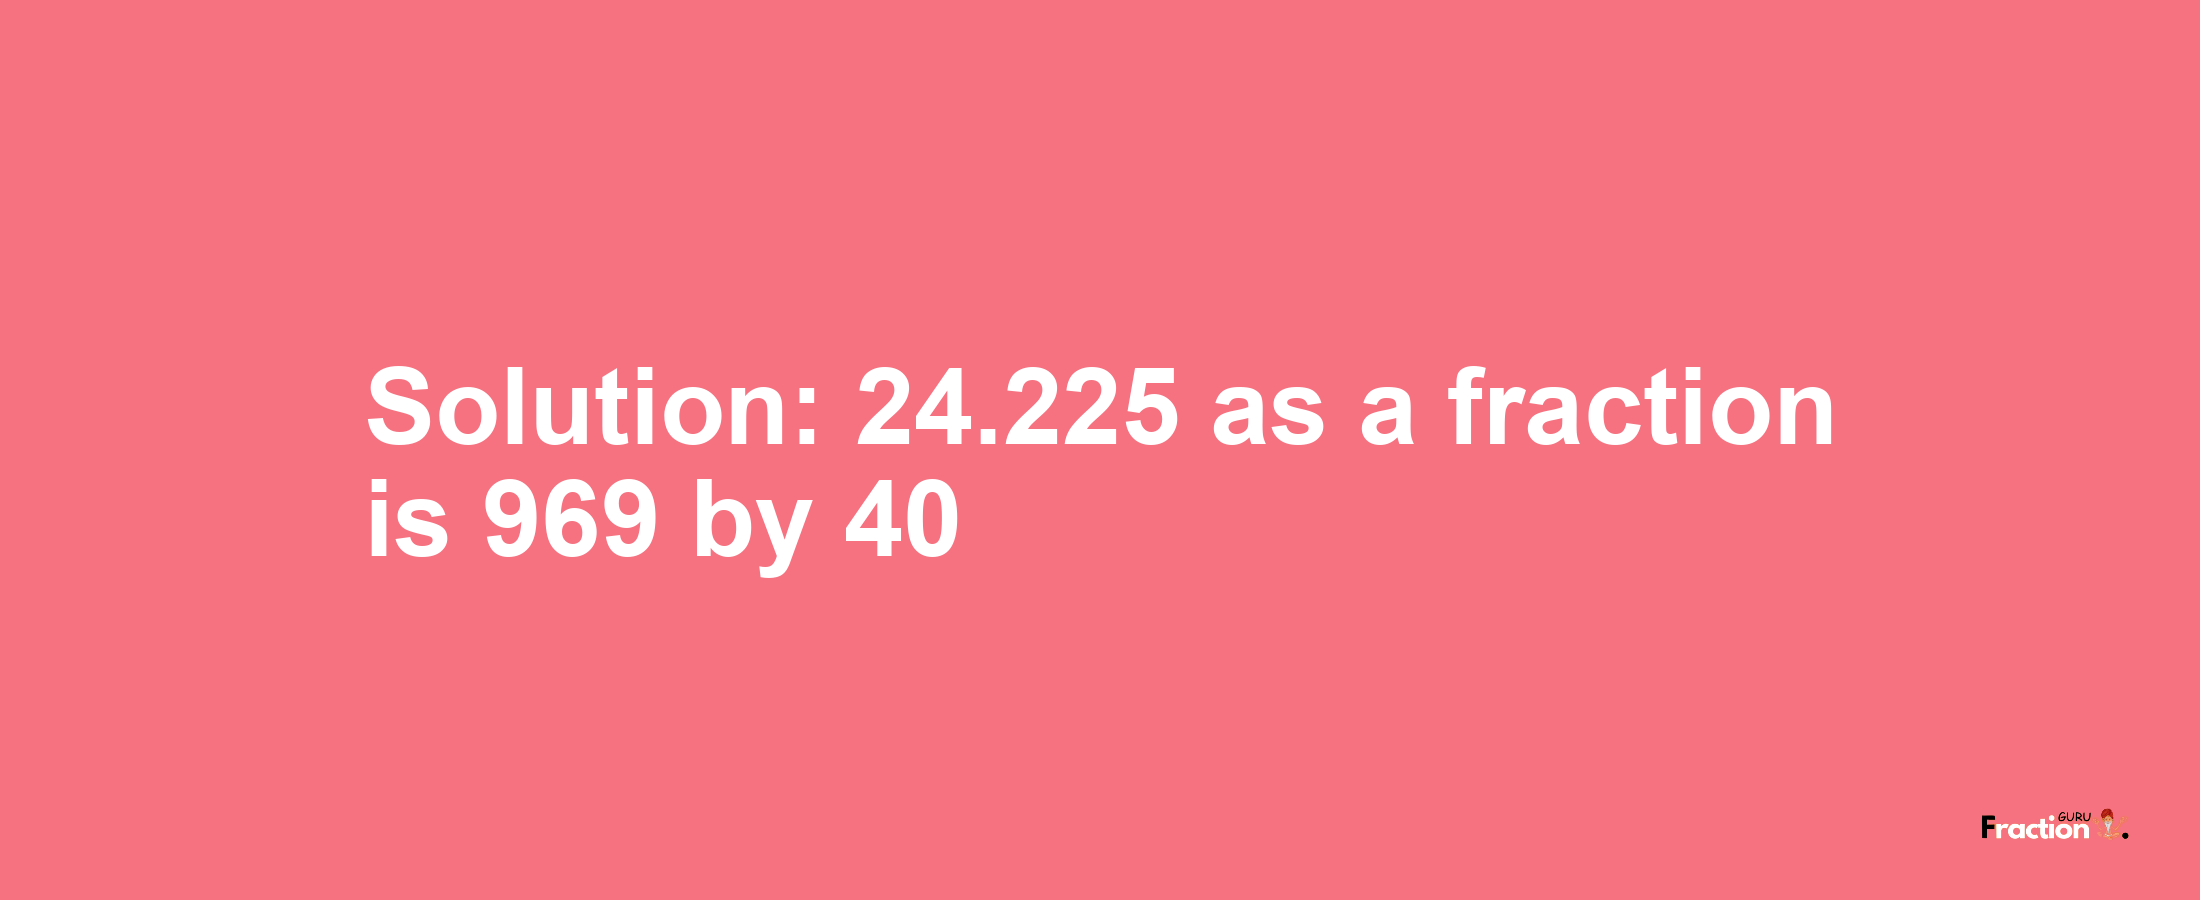 Solution:24.225 as a fraction is 969/40